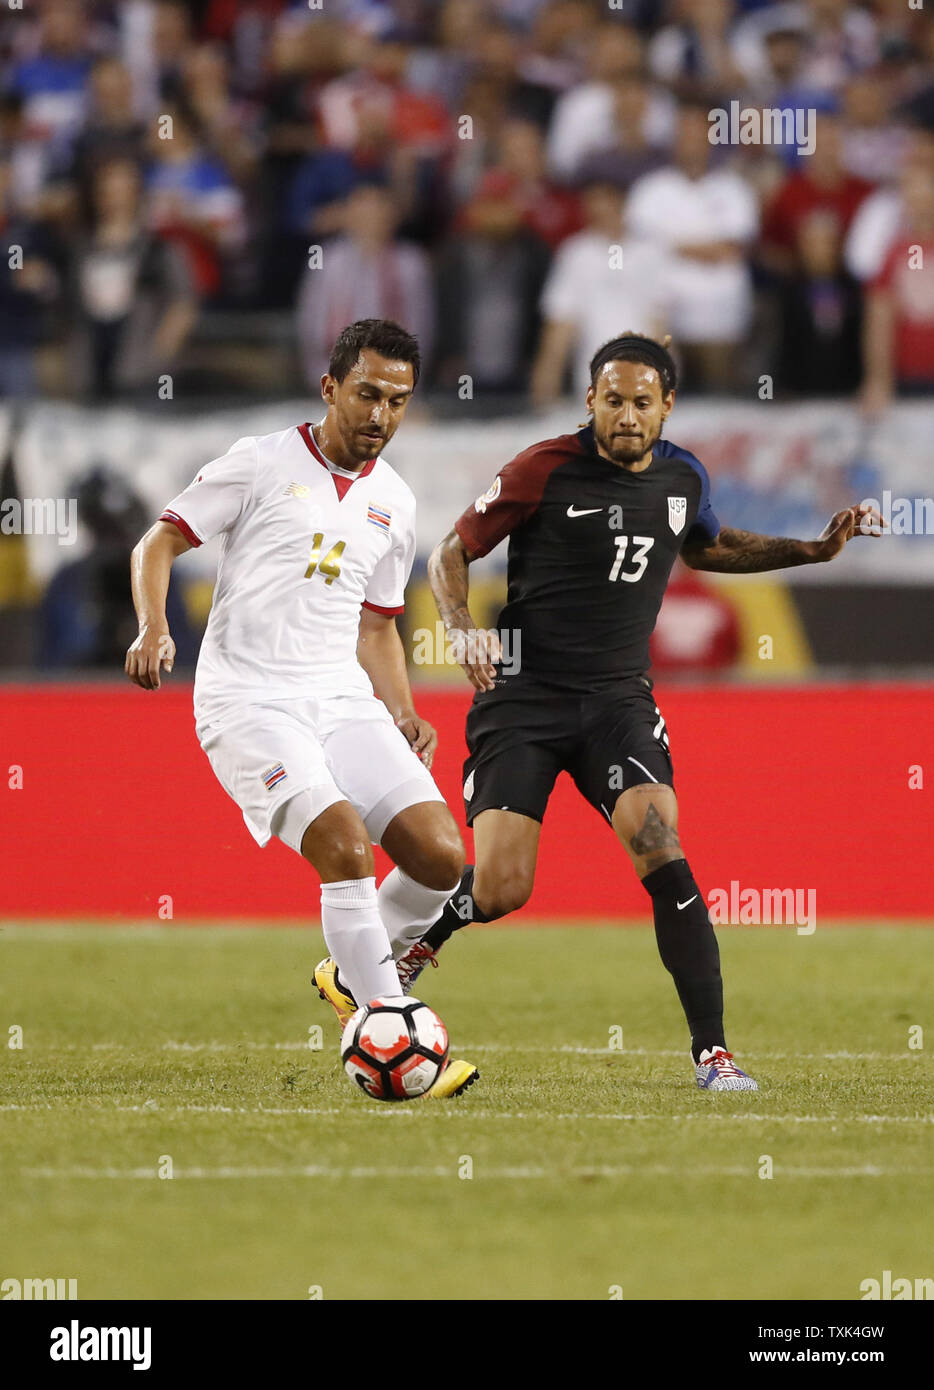 Costa Rica midfielder Randall Azofeifa (L) and United States midfielder Jermaine Jones go for the ball during the first half of a 2016 Copa America Centenario Group A match at Soldier Field in Chicago on June 7, 2016. The United States defeated Costa Rica 4-0.     Photo by Brian Kersey/UPI Stock Photo